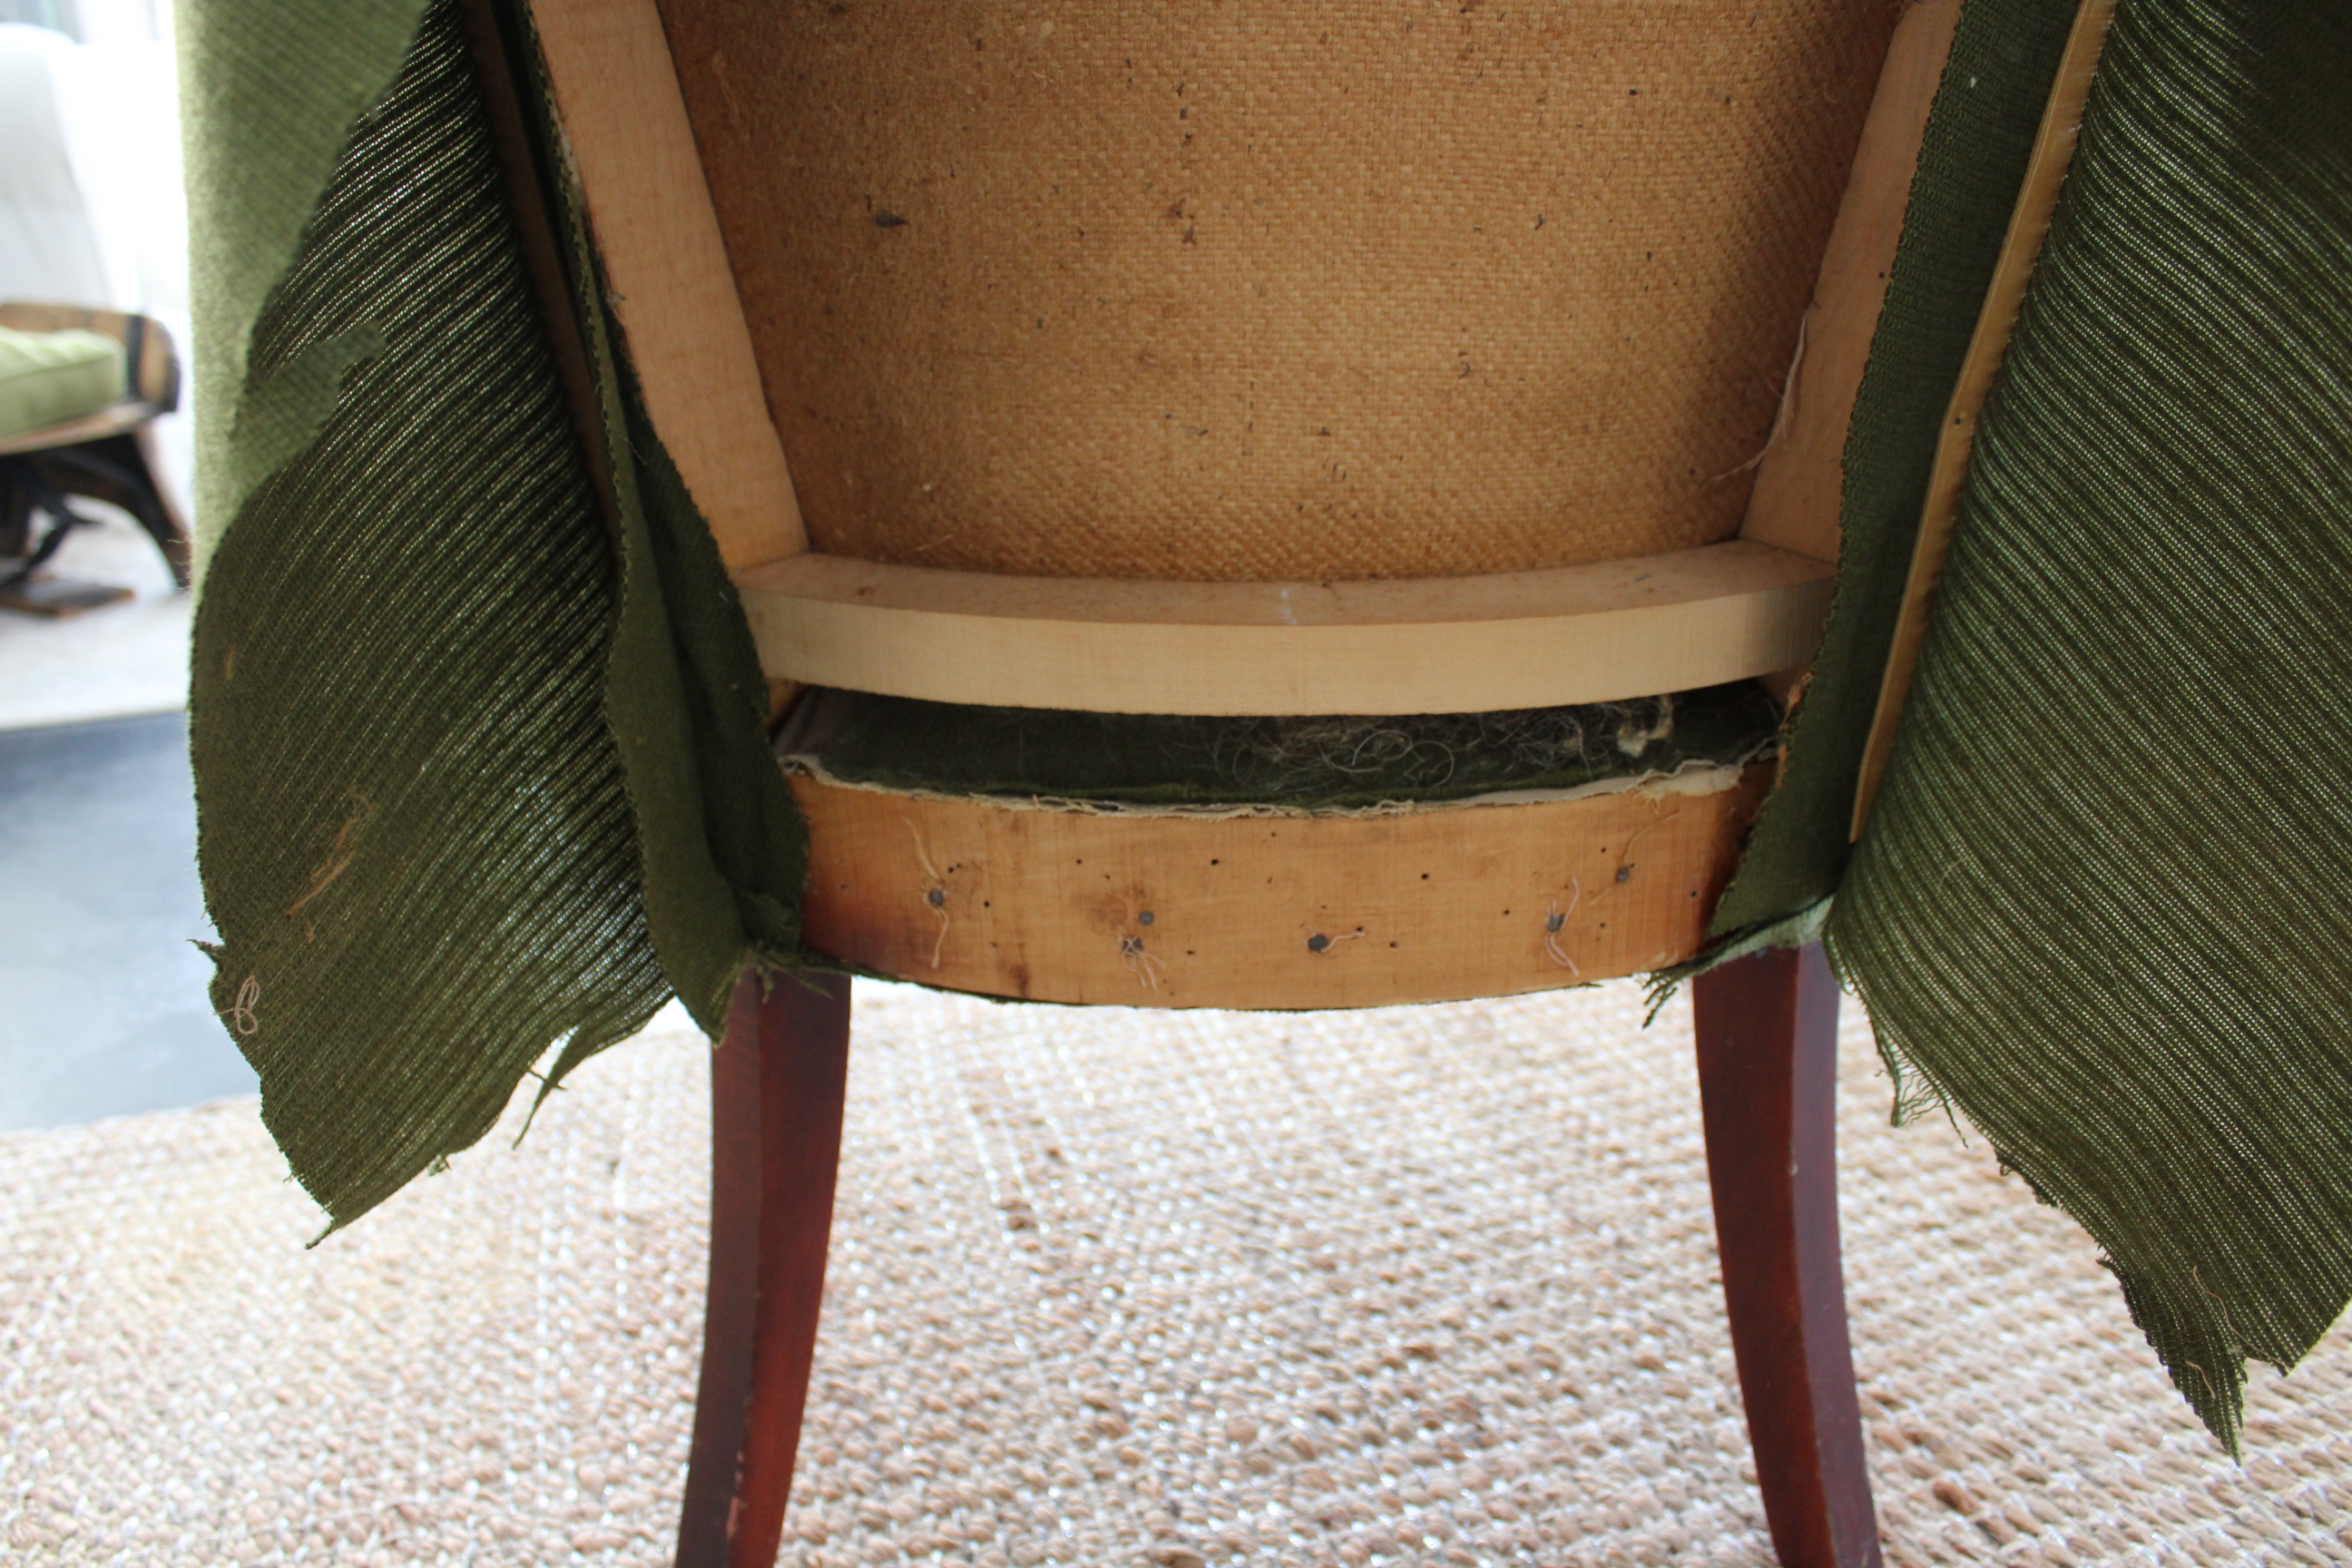 How I Deconstructed A Vintage Chair